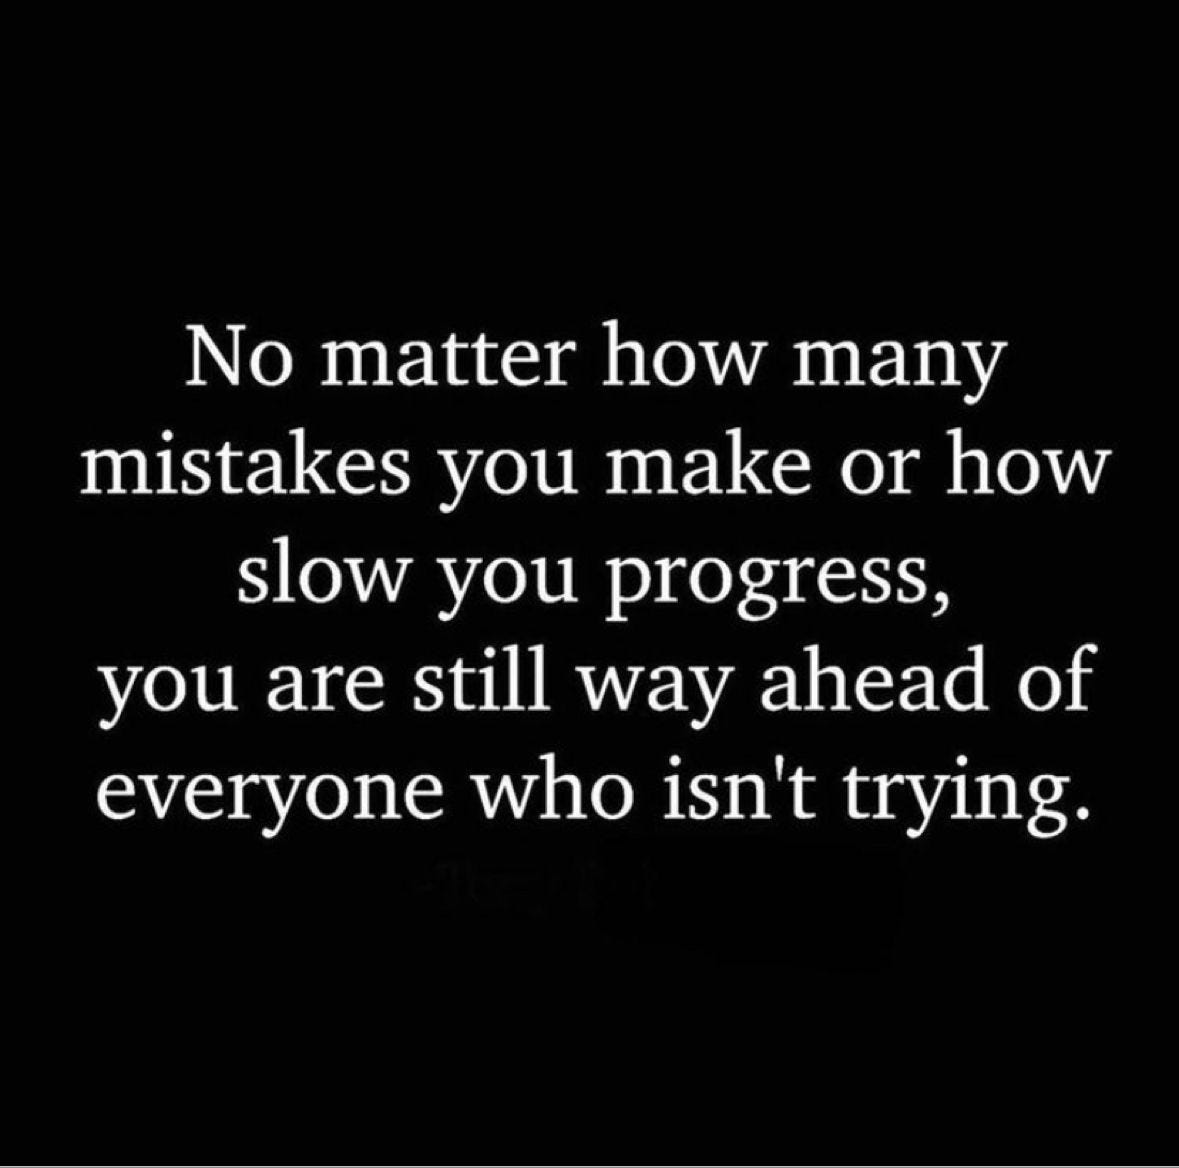 No matter how many mistakes you make or how slow you progress, you